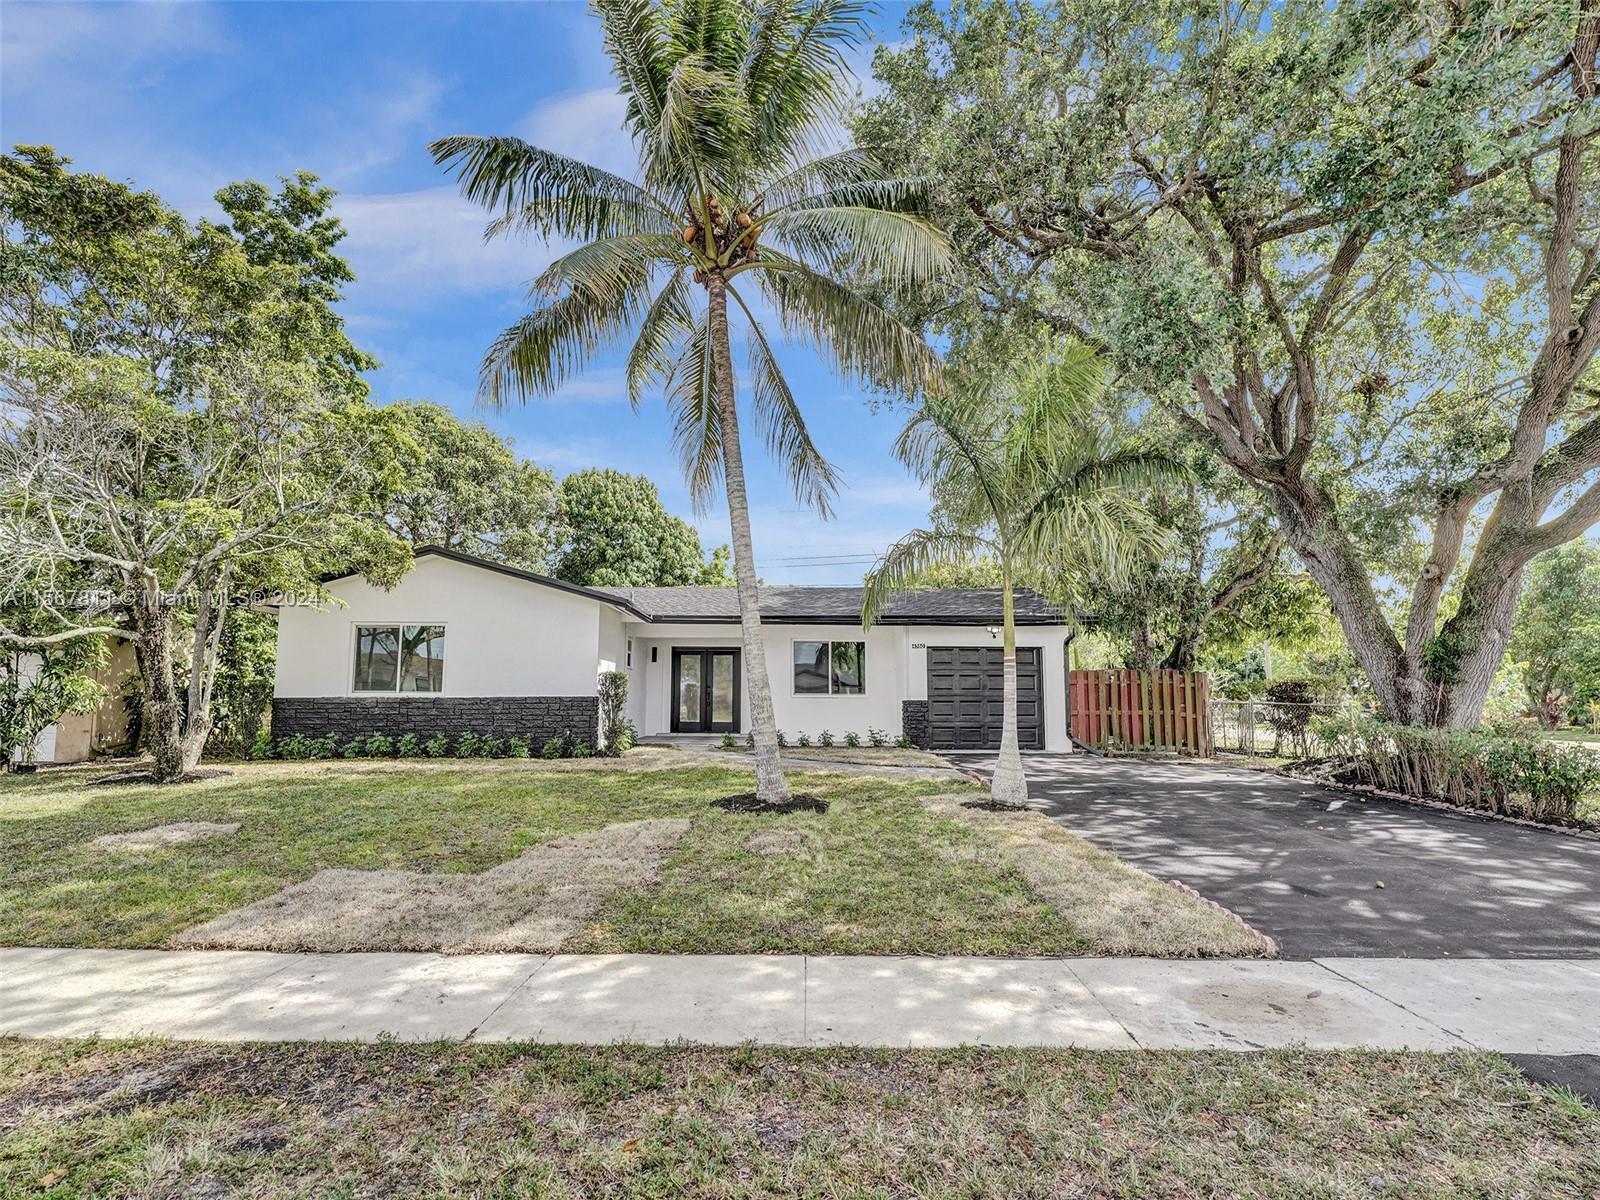 Photo of 4560 NW 3rd Pl in Plantation, FL